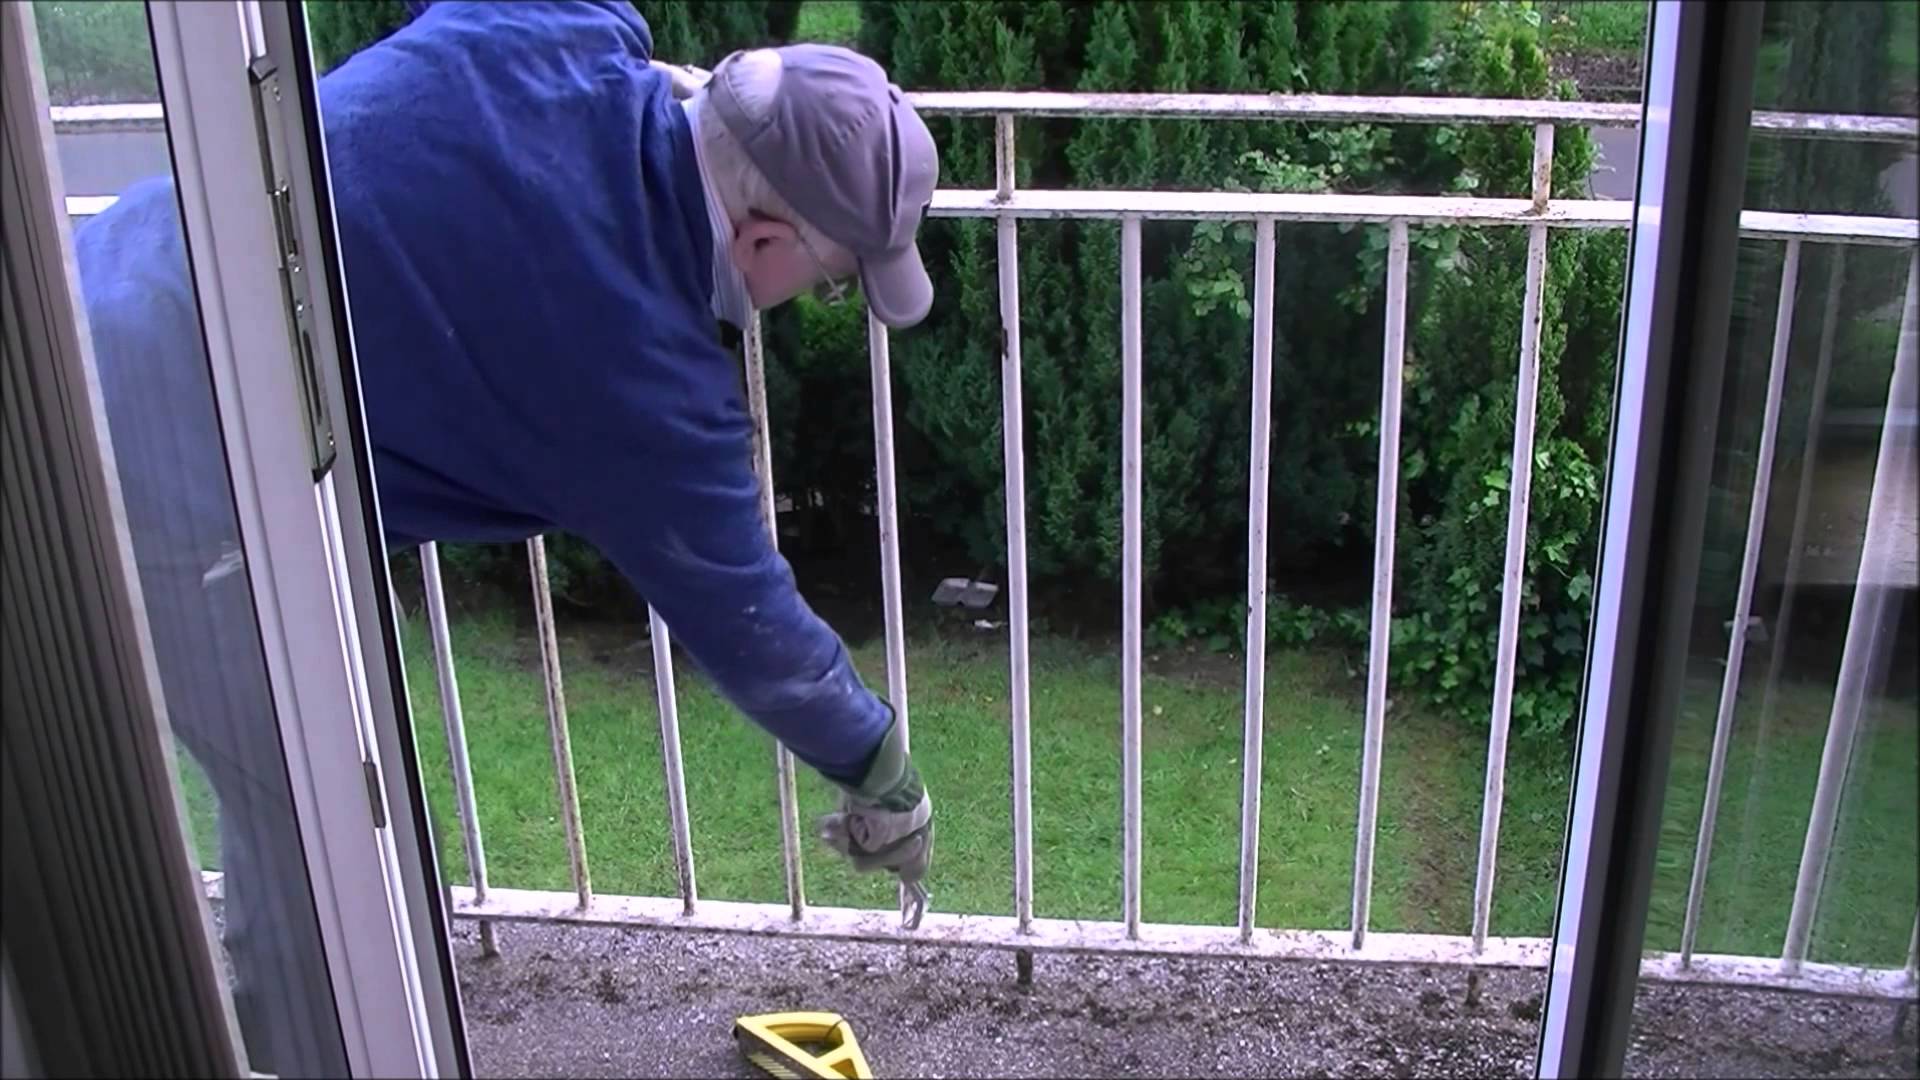 removing rust and painting Julliets metal balcony - YouTube